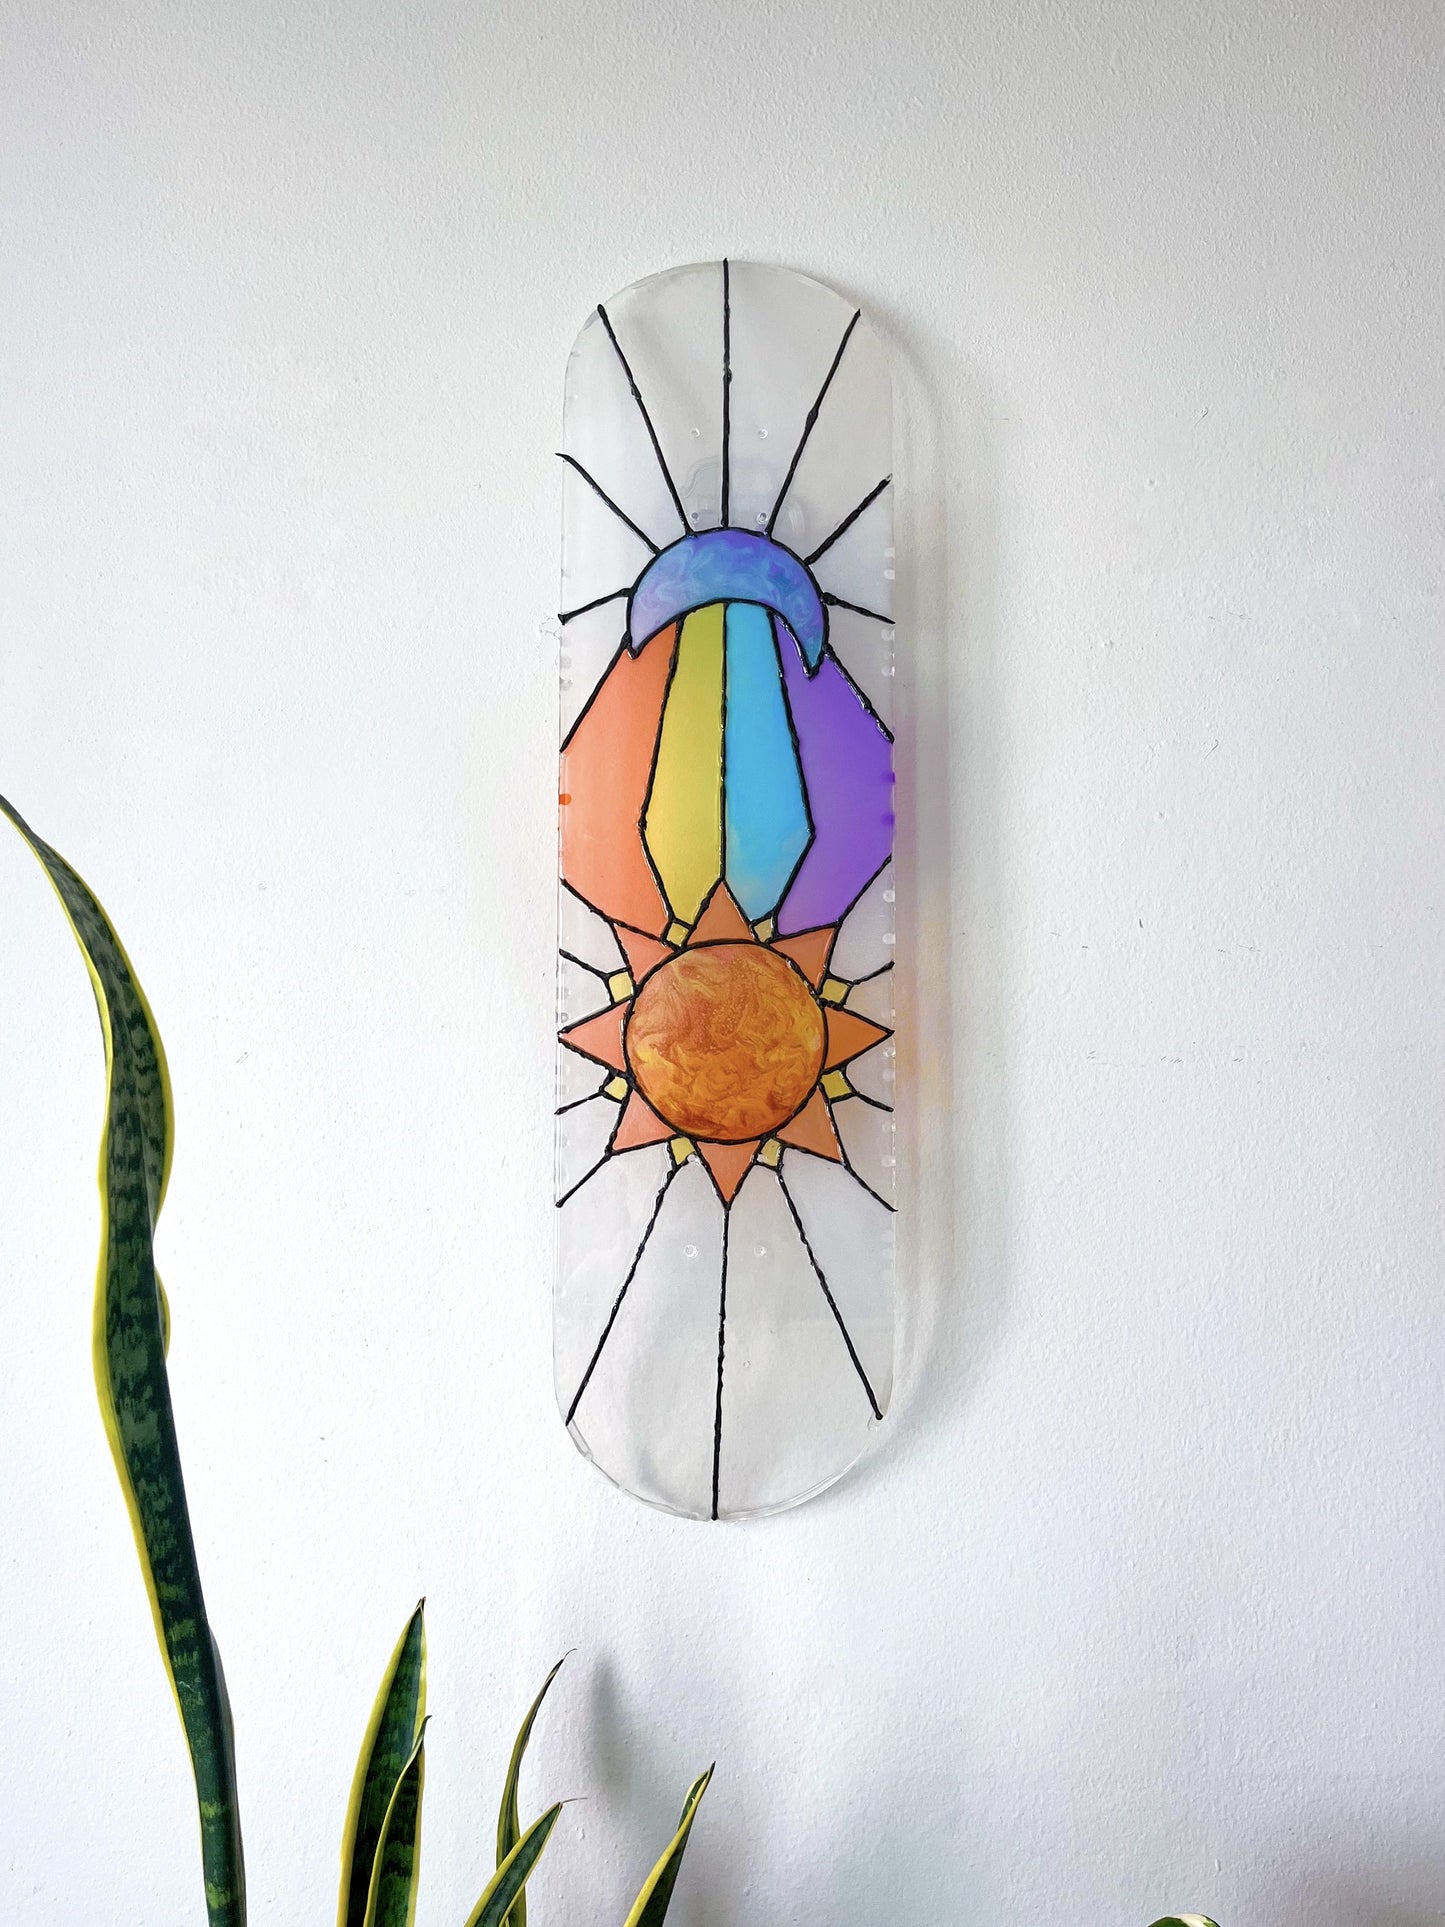 Stained glass see-through skateboard wall art featuring sun and moon design casting colorful shadow.